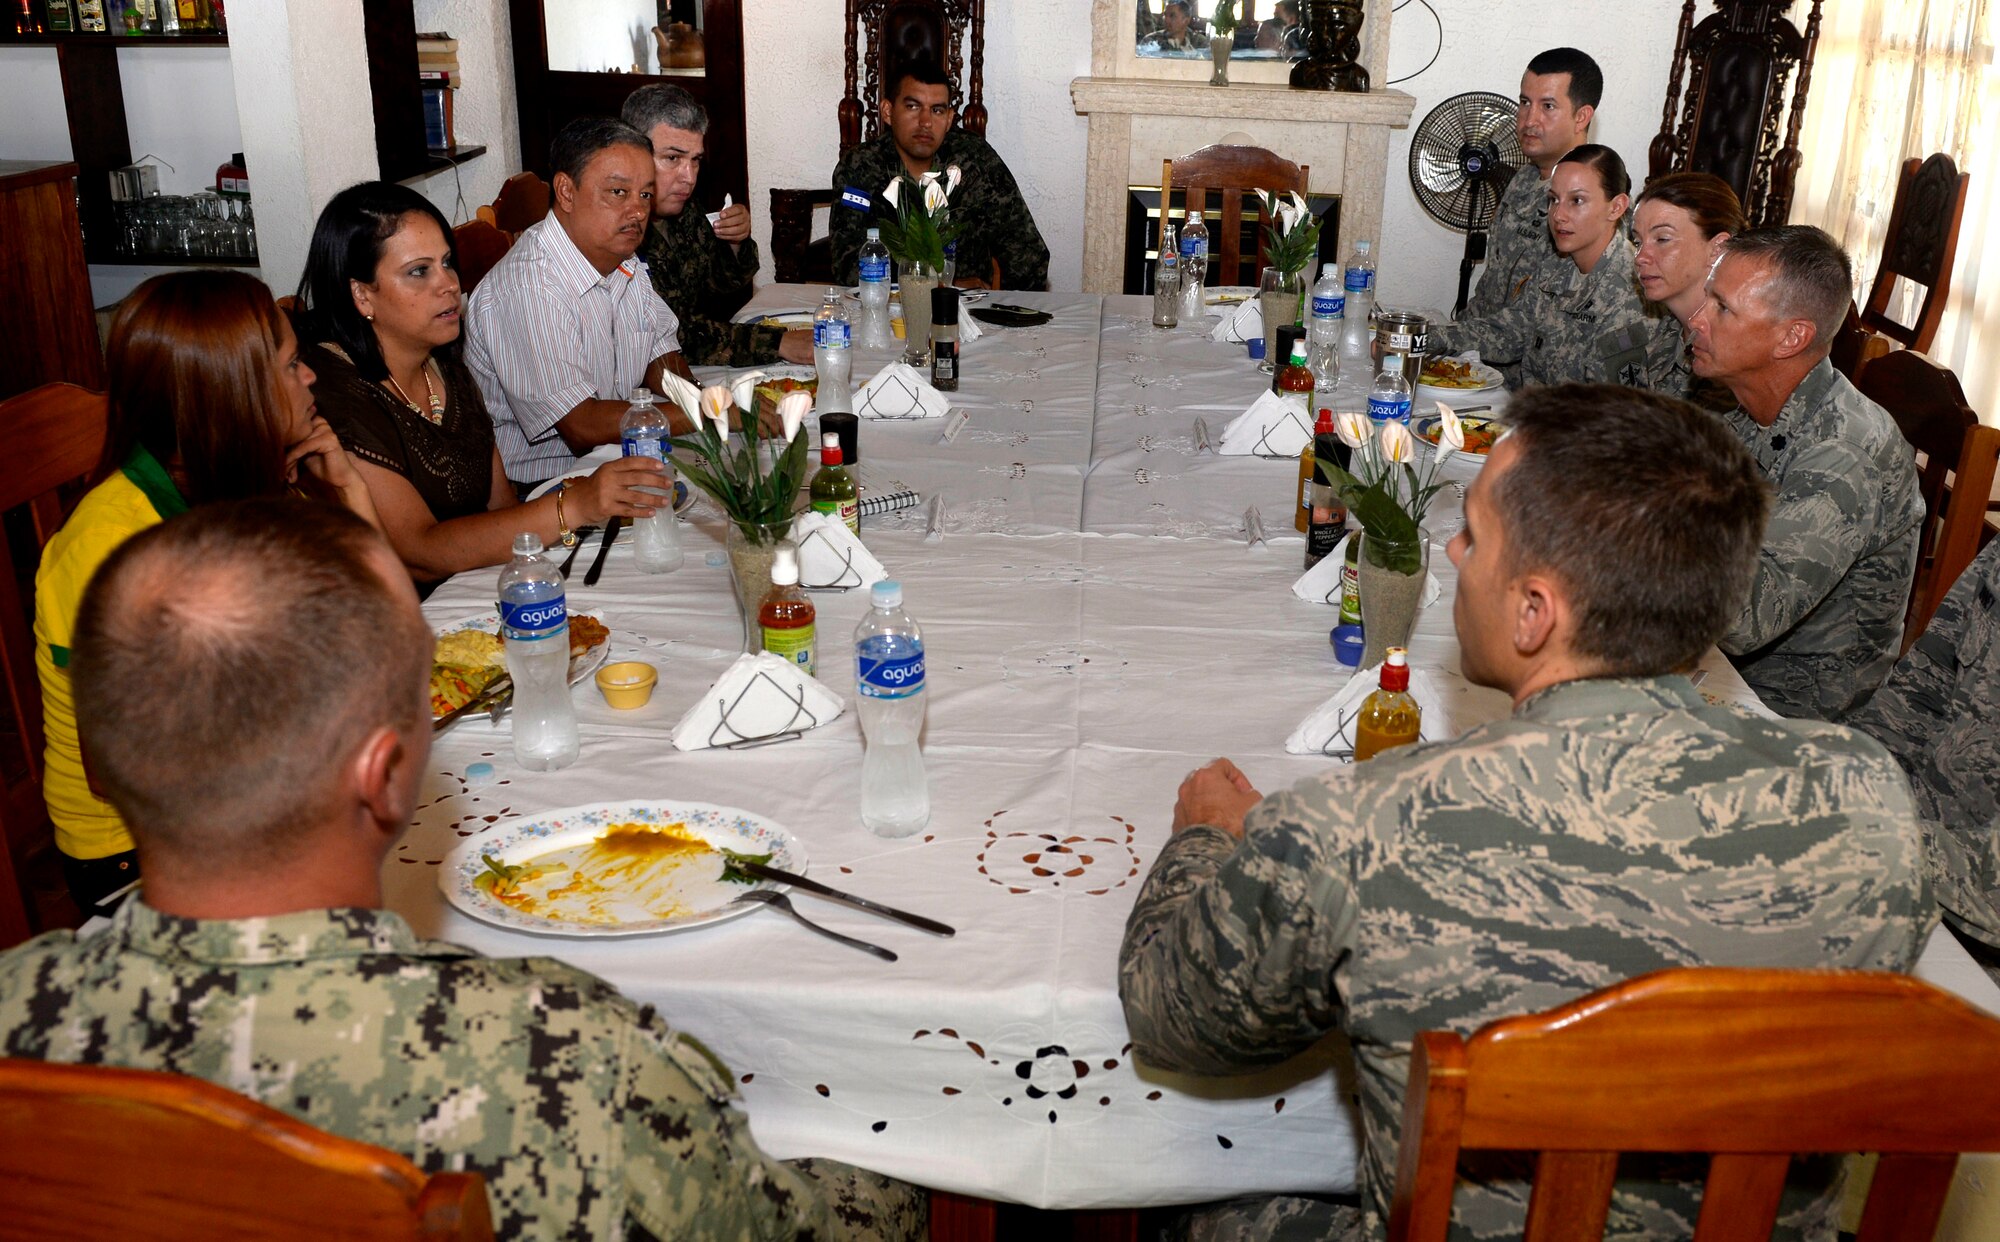 Exercise New Horizons Honduras 2015 leadership and Department of Colón leadership met in Trujillo, Honduras, May 30, 2015. Elliott, a Grove City, Penn., native, held the meeting in order to give local leadership the opportunity to meet and answer questions of various New Horizons personnel prior to the official start of the exercise. New Horizons was launched in the 1980s and is an annual joint humanitarian assistance exercise that U.S. Southern Command conducts with a partner nation in Central America, South America or the Caribbean. The exercise improves joint training readiness of U.S. and partner nation civil engineers, medical professionals and support personnel through humanitarian assistance activities. (U.S. Air Force photo by Capt. David J. Murphy/Released)